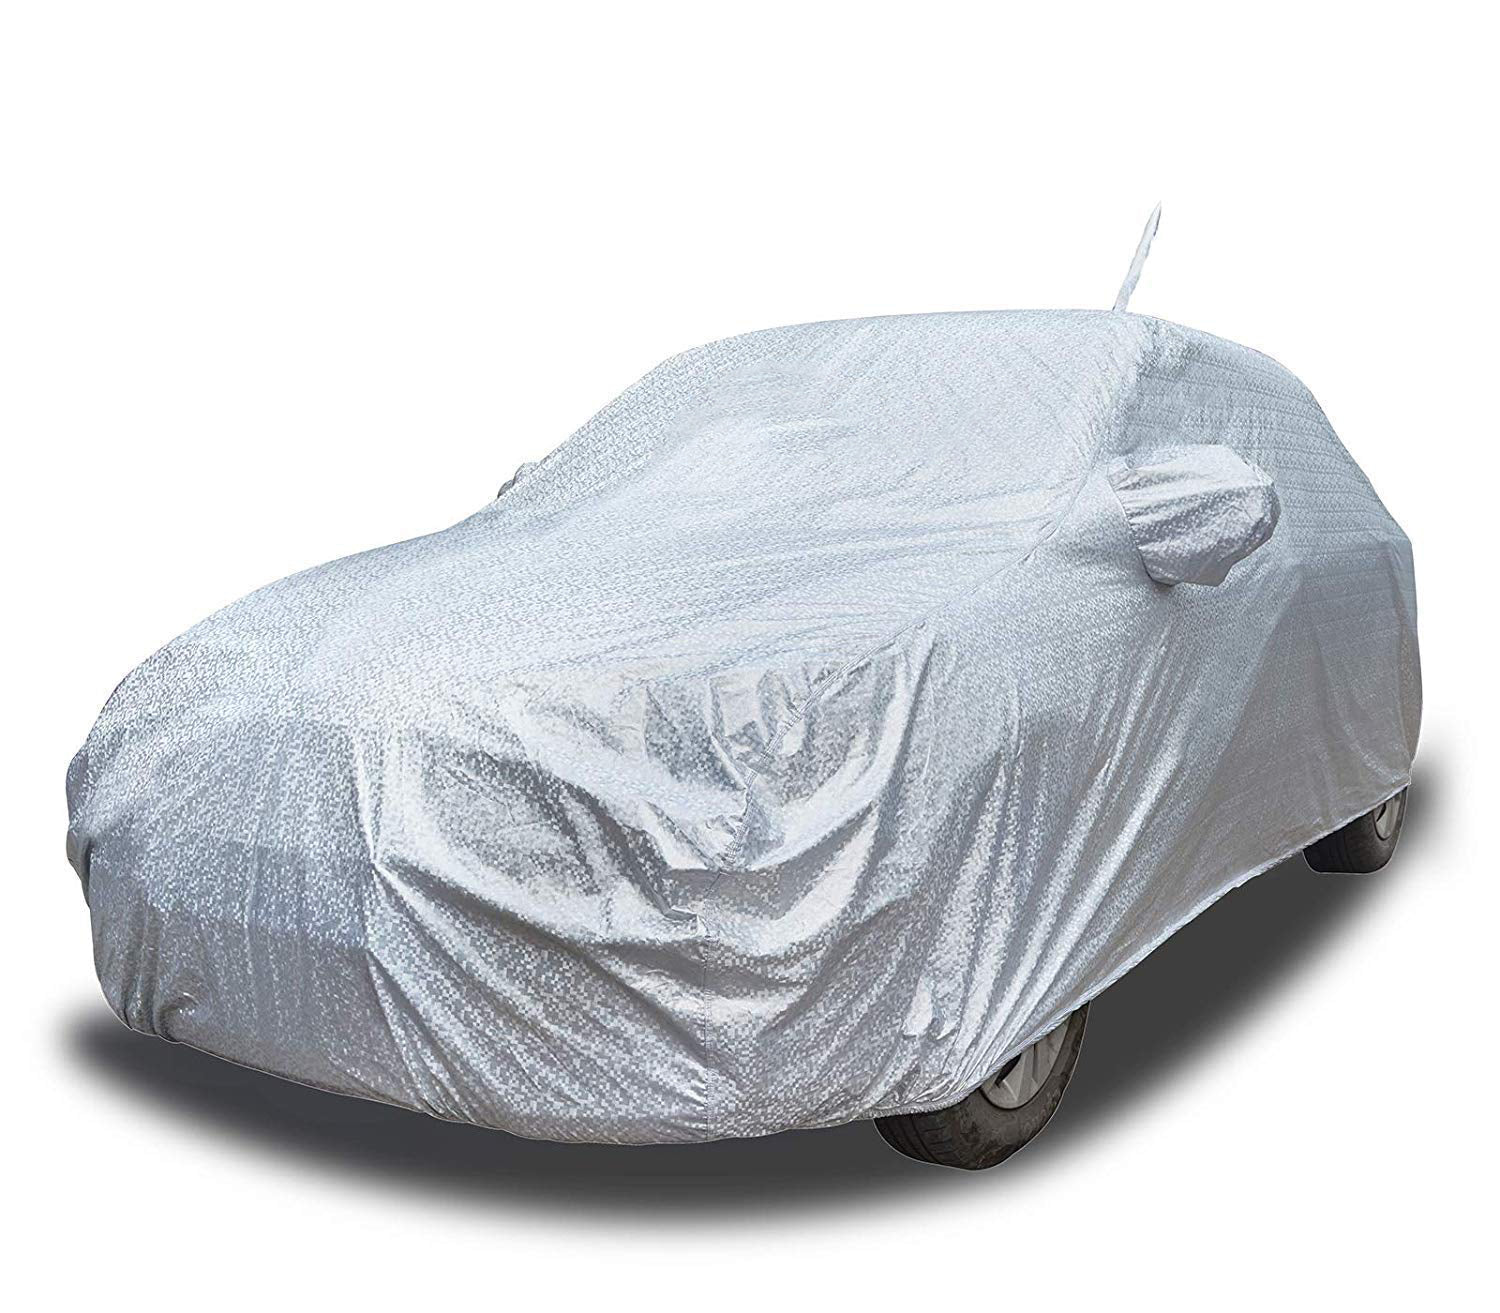 BMW 5 Series Waterproof Car Cover, All Weather Resistant, Triple Stitched  with Soft Cotton Lining, Side Mirror & Antenna Pocket (AERO Silver)